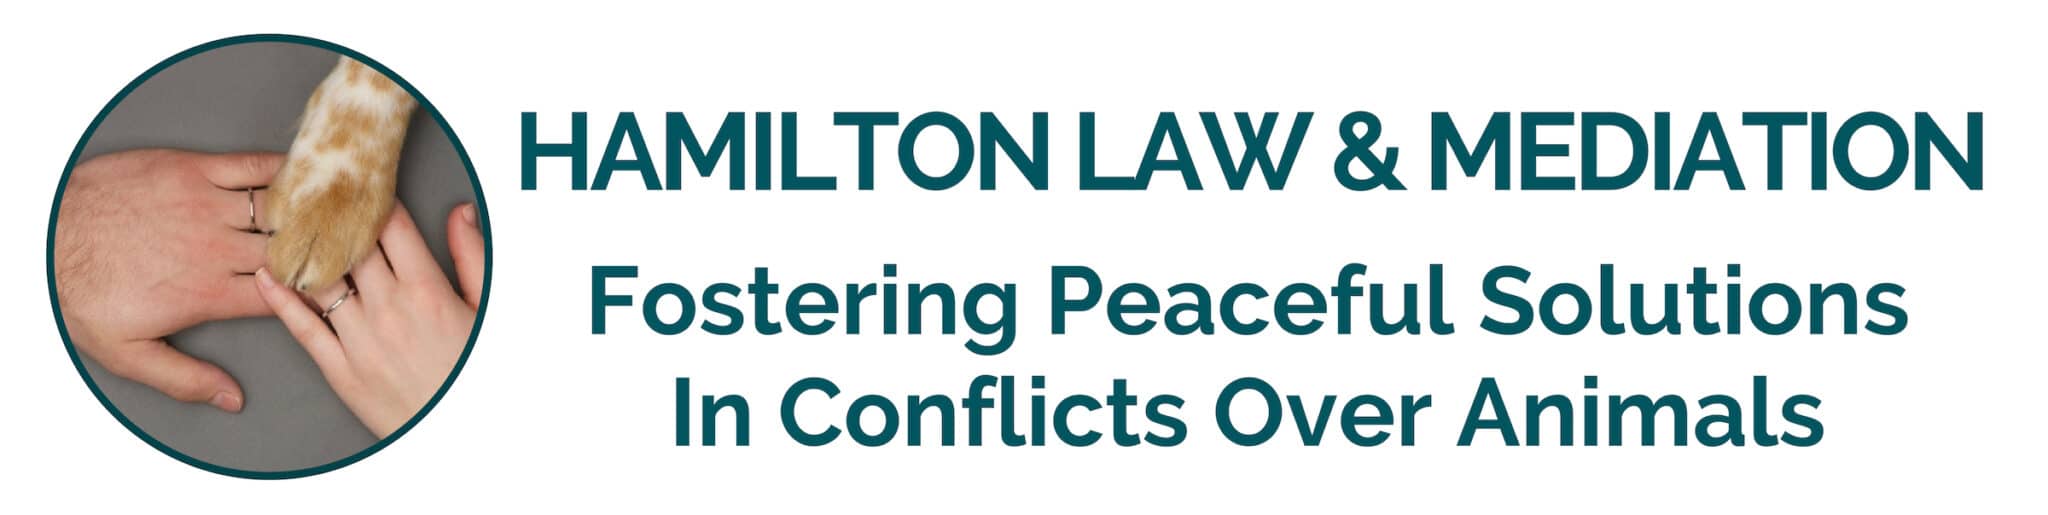 Hamilton Law & Mediation. Fostering peaceful solutions in conflicts over animals.